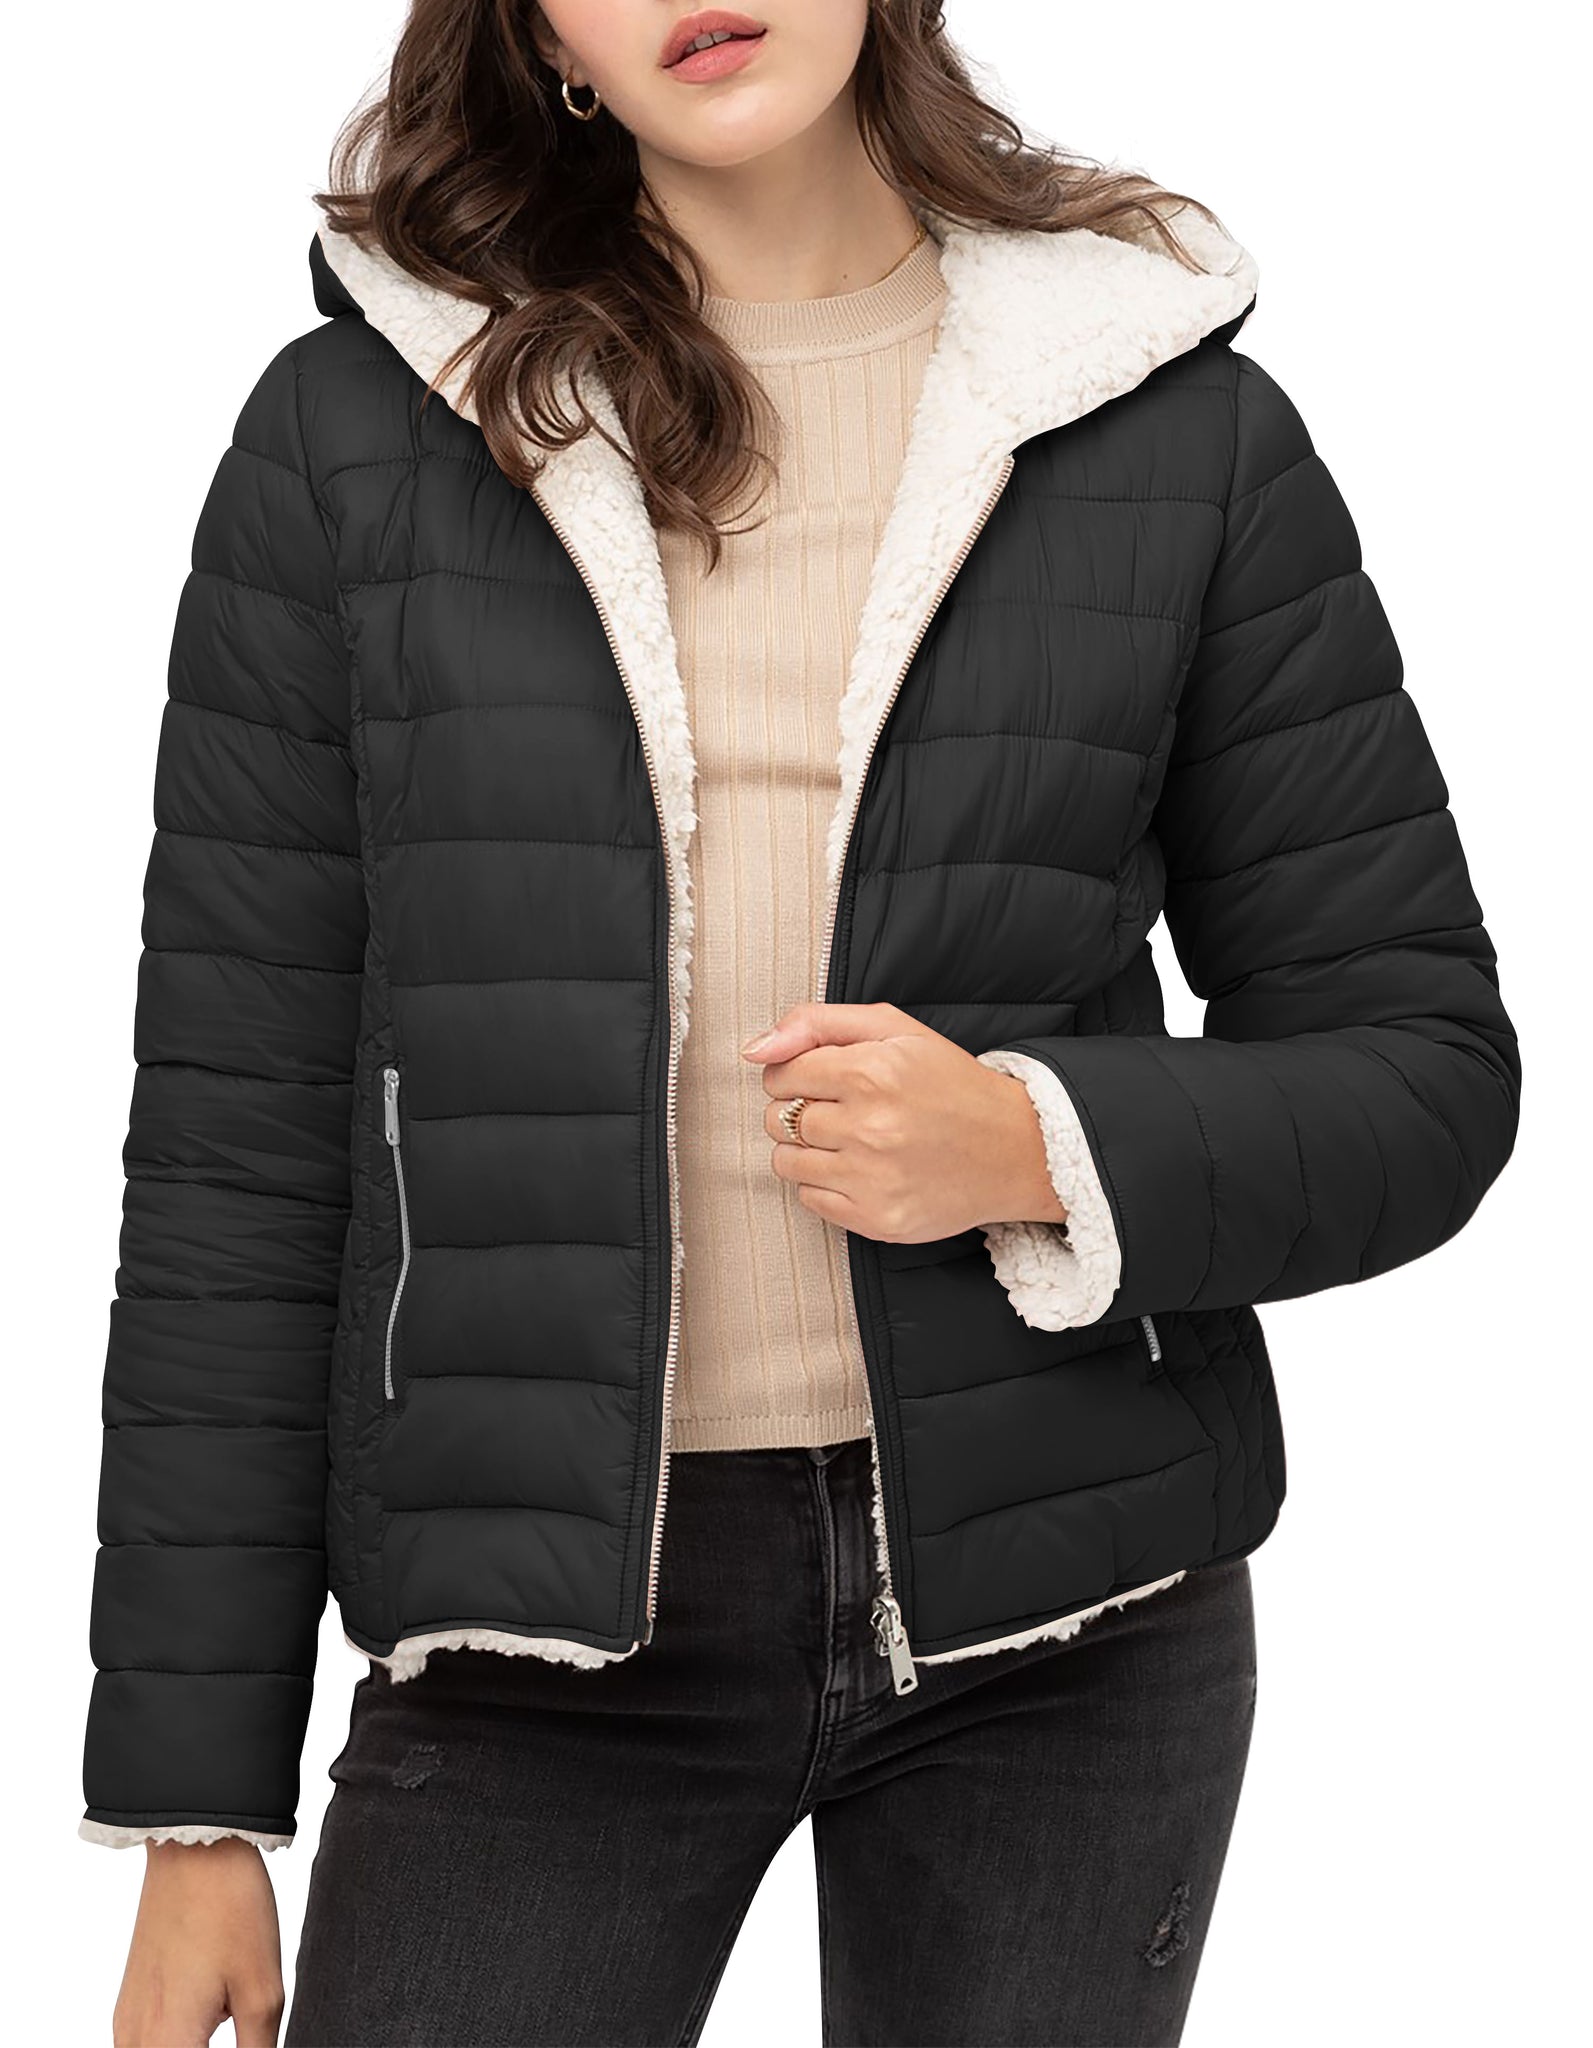 ladies_reversible_jacket_hood_fleece_white_puffer_with_fur_black_collection_water_resistance_off_white_synthetic_alternative_down_sherpa_lined_lightweight_military_parka_ski_coat_nuage_quilted_outerwear_warm_winter_fall_plush_padding_petite_mujer_chaqueta_outdoor_hike_performance_camping_commuter_short_midlength_Black